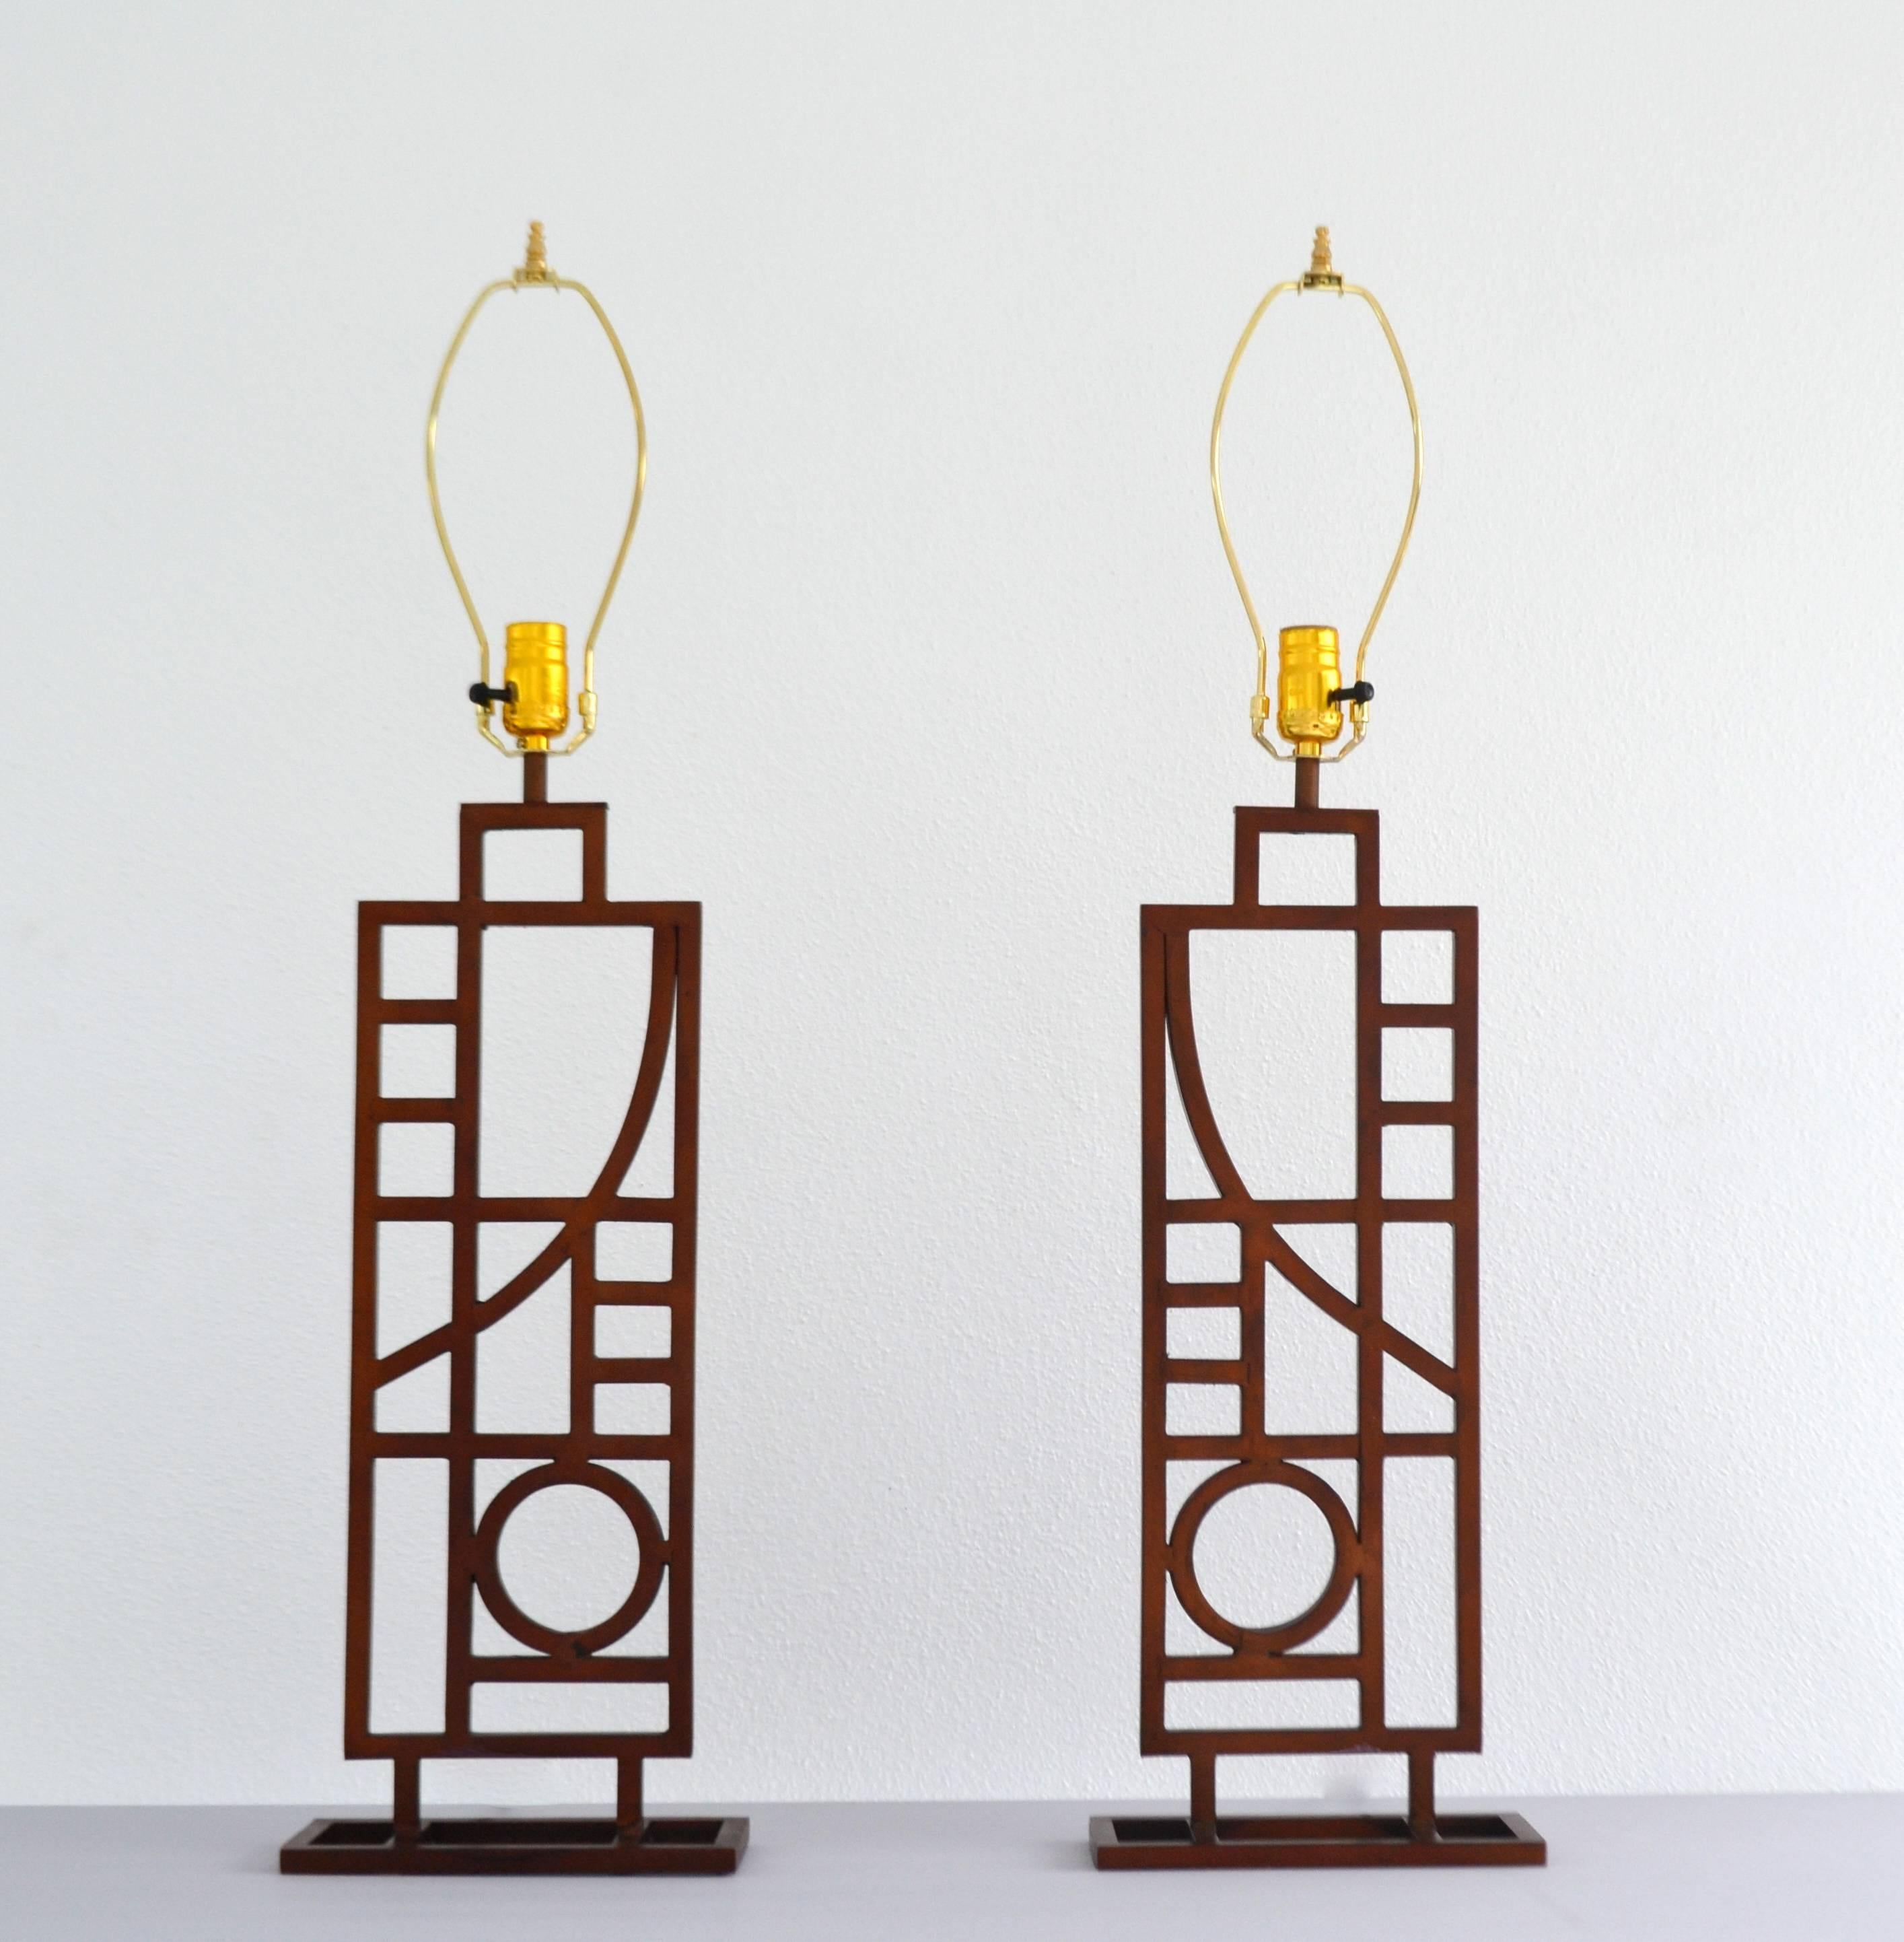 Striking pair of burnished copper Postmodern table lamps by Robert Sonneman for George Kovacs, circa 1980s. Lamps have been rewired with brass fitting. Shades not included.
Measurements:
Height to top of finial is 34